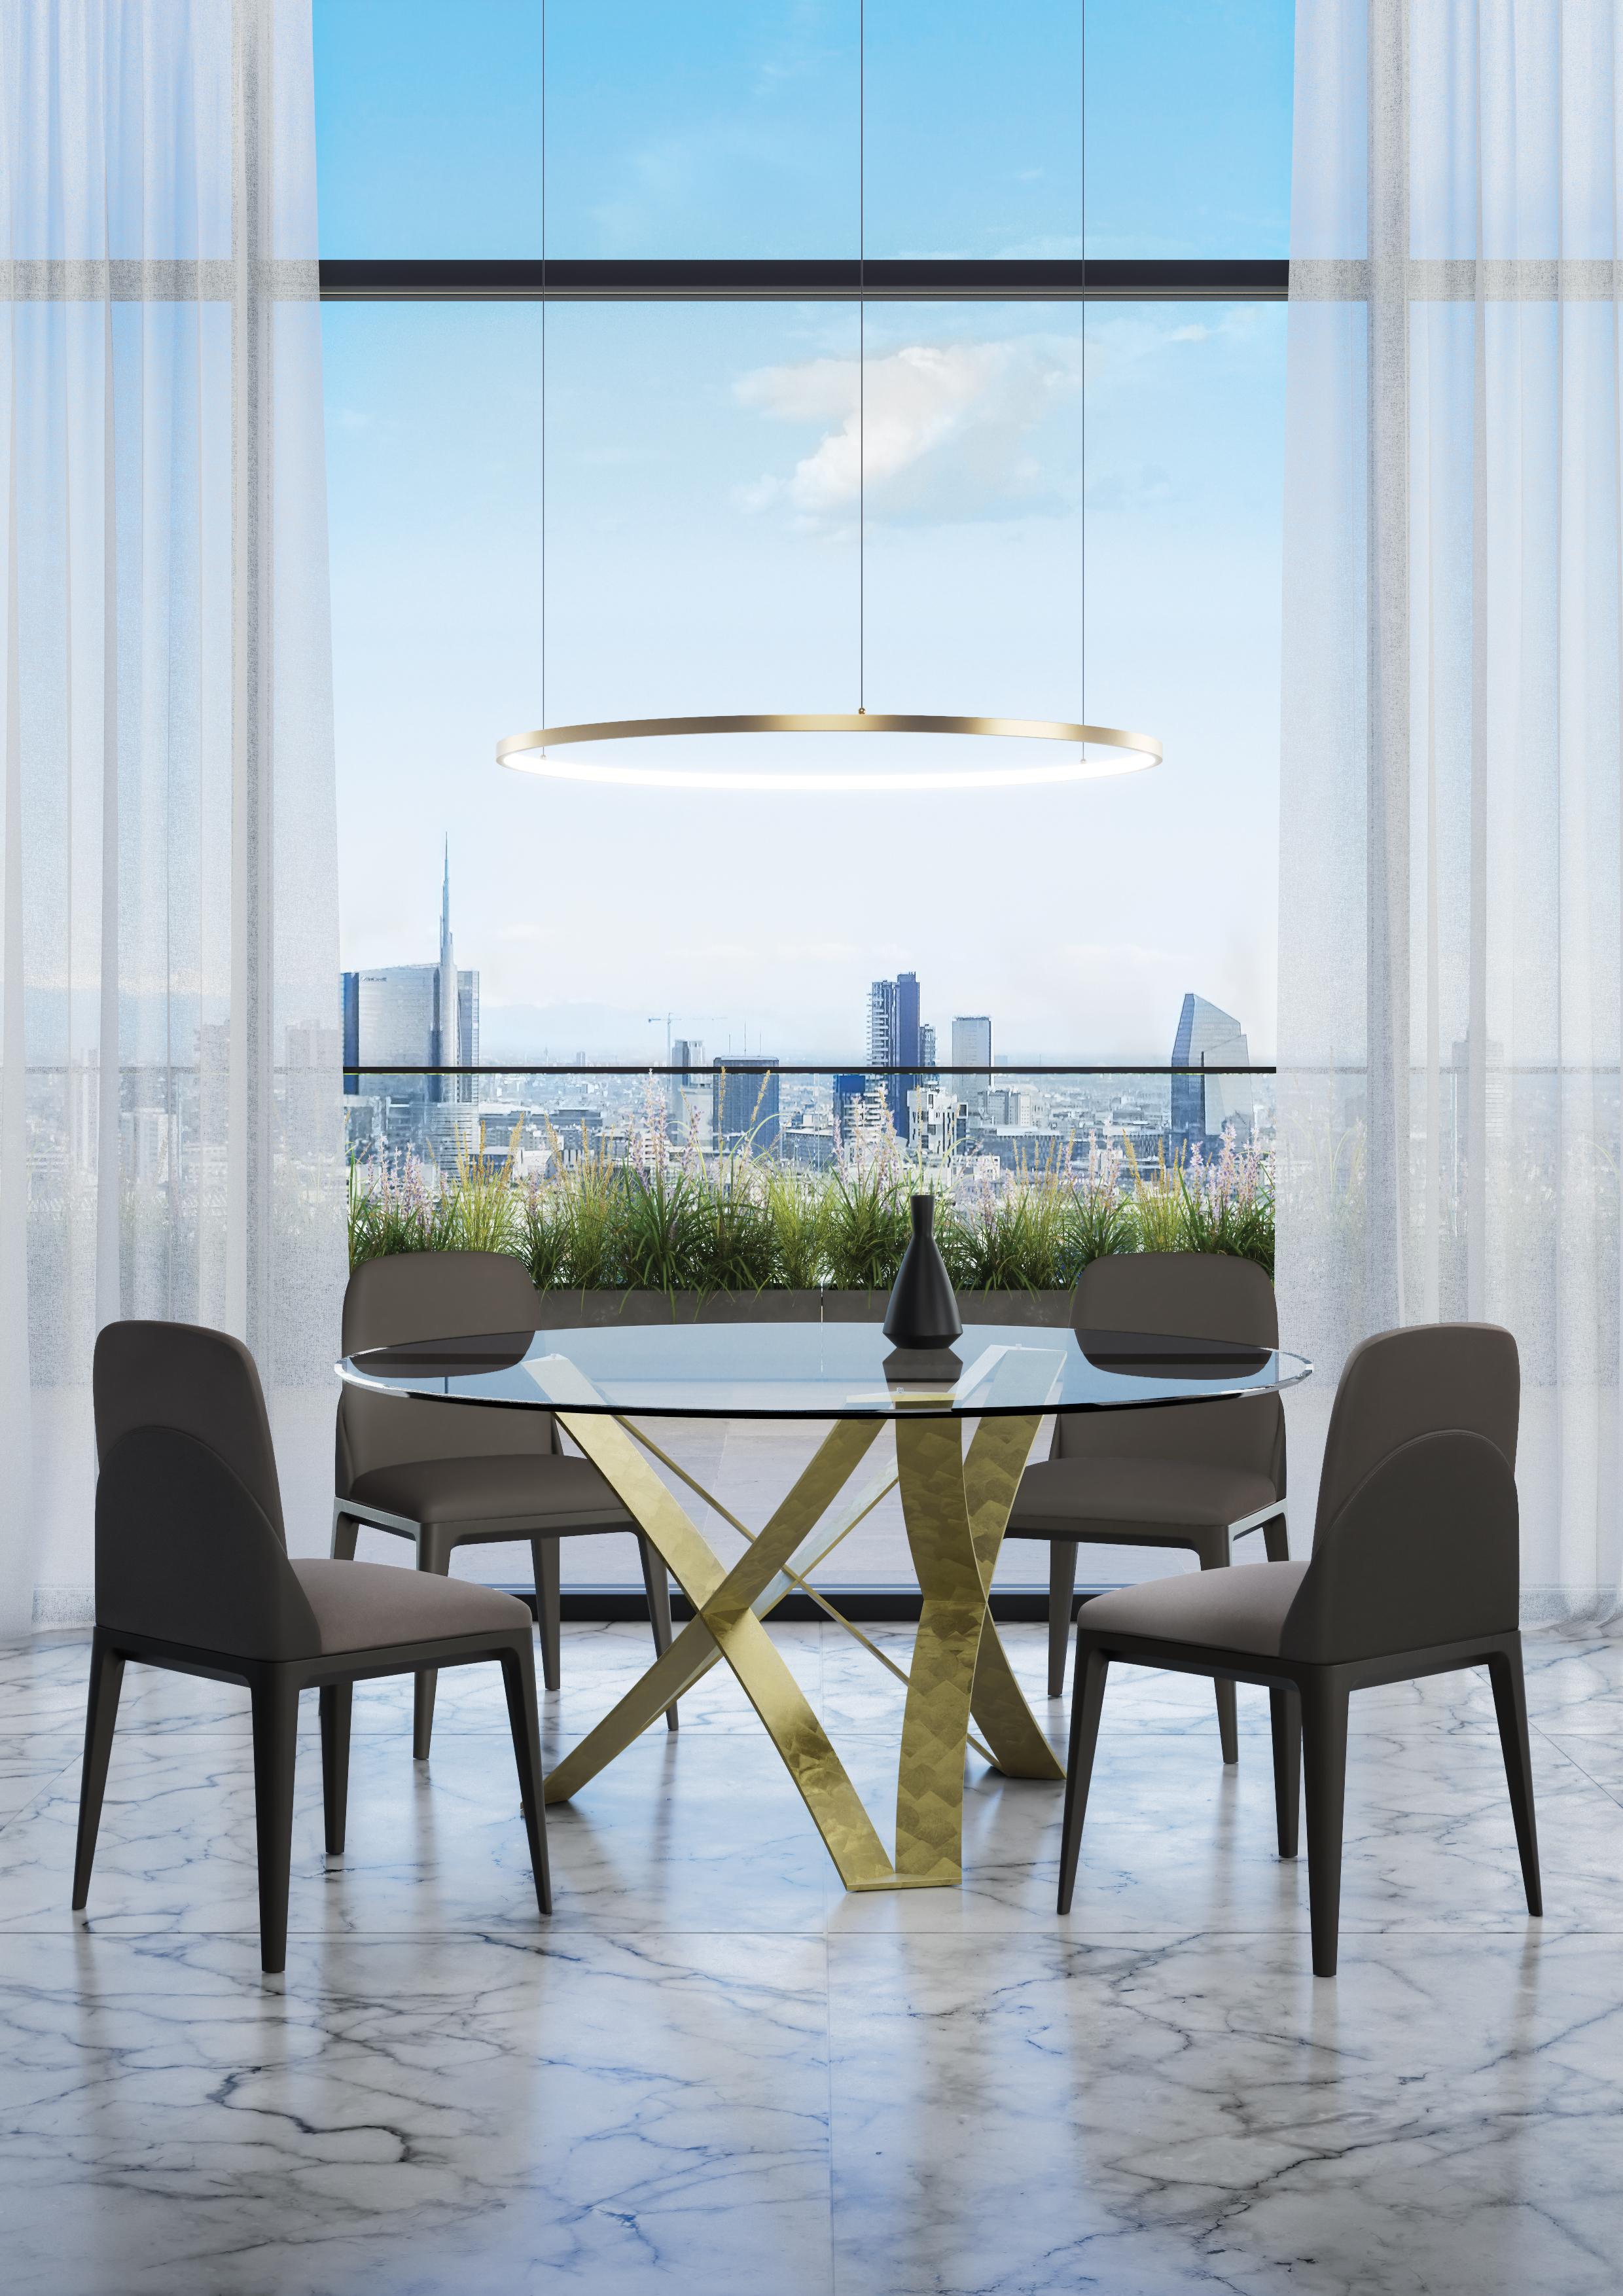 Dioniso Dining Table by Chinellato Design
Dimensions: D 160 x H 73 cm
Materials: Top: Extra clear tempered glass.
Base: Large Gold Pieces 208.

Round dining table available in two sizes, offered with three combinations of base and Top finishes.
The